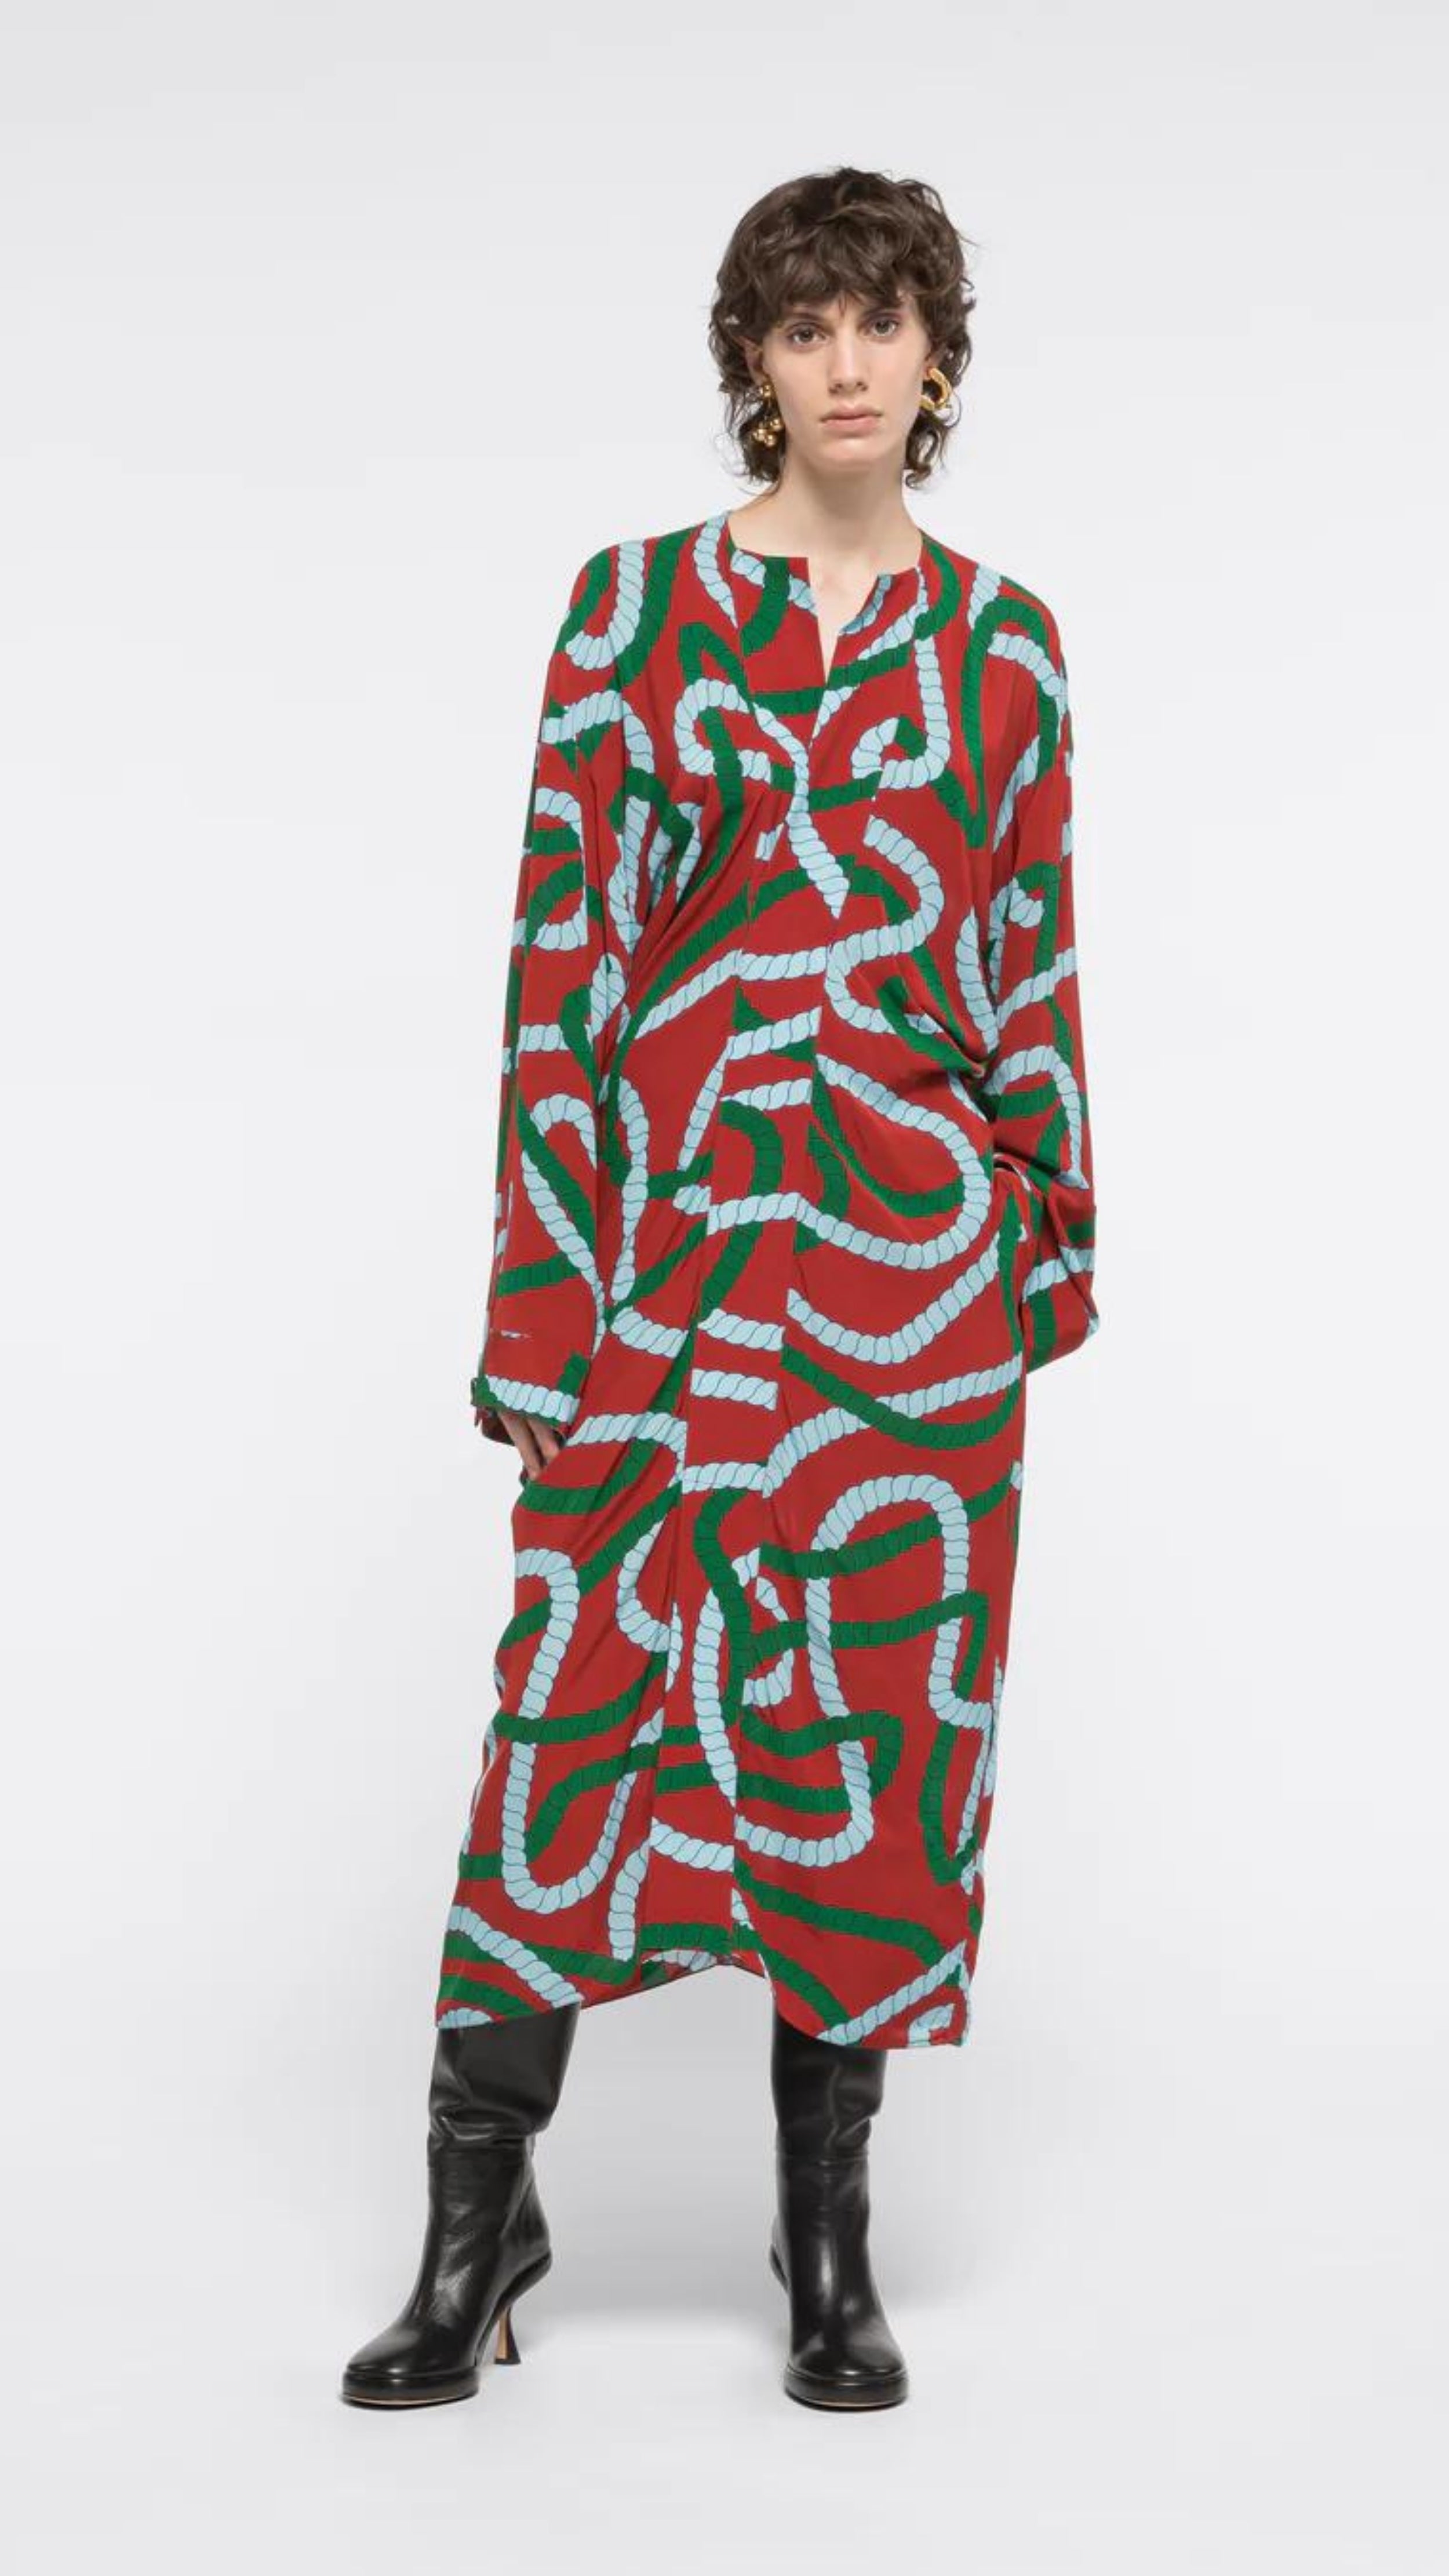 AZ Factory Colville Molly Molloy Lucinda Chambers, Printed Draped Midi Dress. Midi dress with long sleeves and a v cut neckline. It&#39;s a rust red with intertwining  rope pattern in green and sky blue. Shown on model facing front.